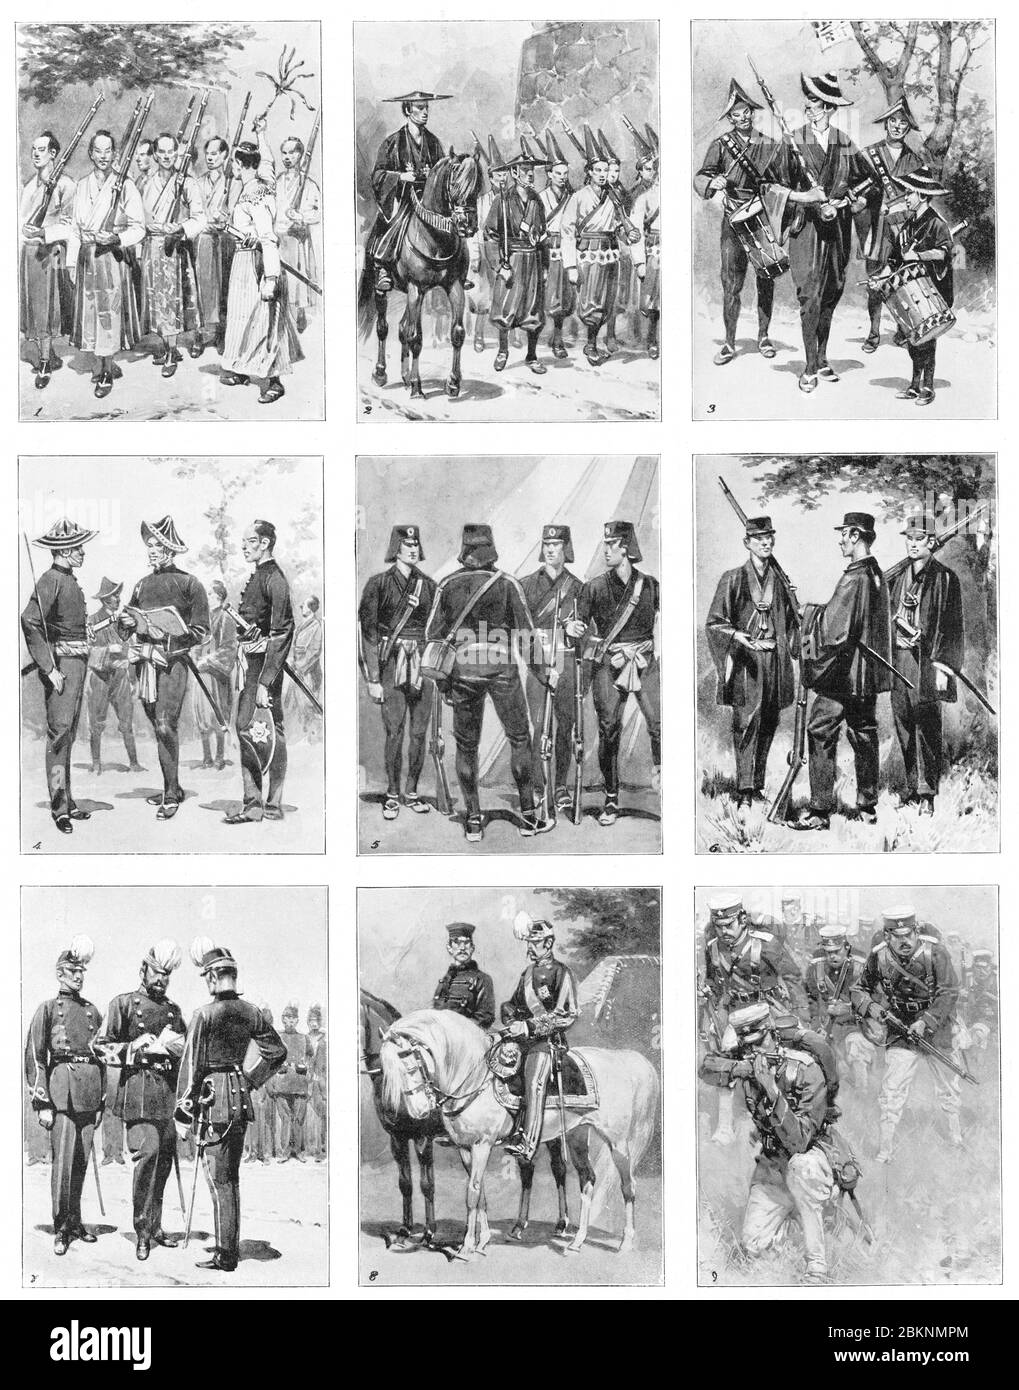 1900s Japan - Japanese Military Uniforms ] — Page from the Illustrated  London News Vol CXXIV, 1904 (Meiji 37) showing Japanese military uniforms.  Original caption: “Japan's leap from Barbarism to civilisation :